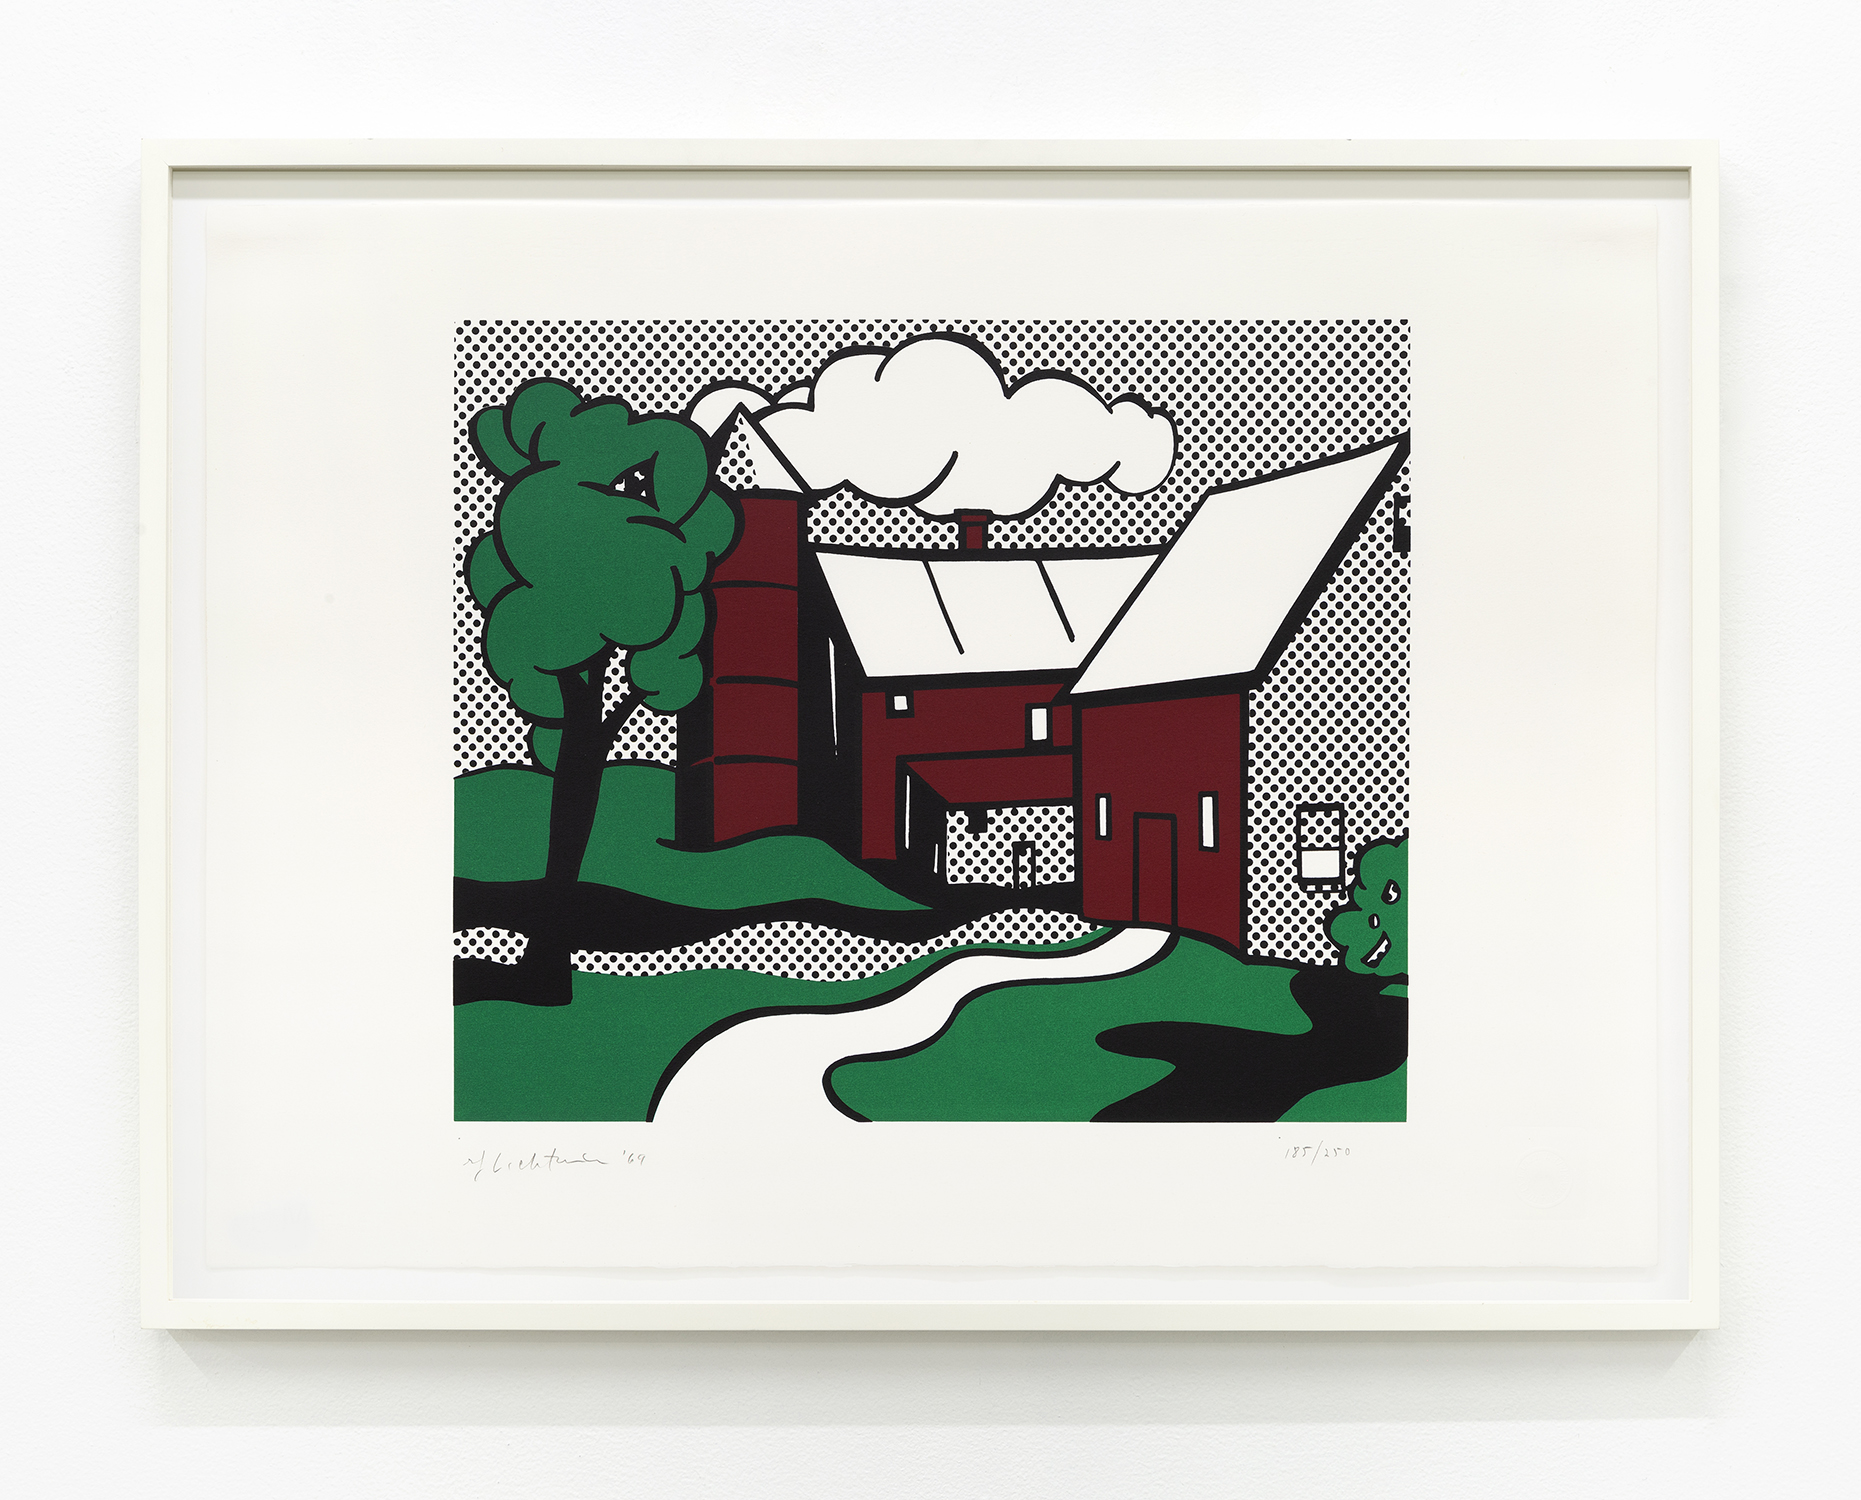 Red Barn, 1969, Screenprint19 x 26 inches (48.3 x 66 cm)Edition of 250